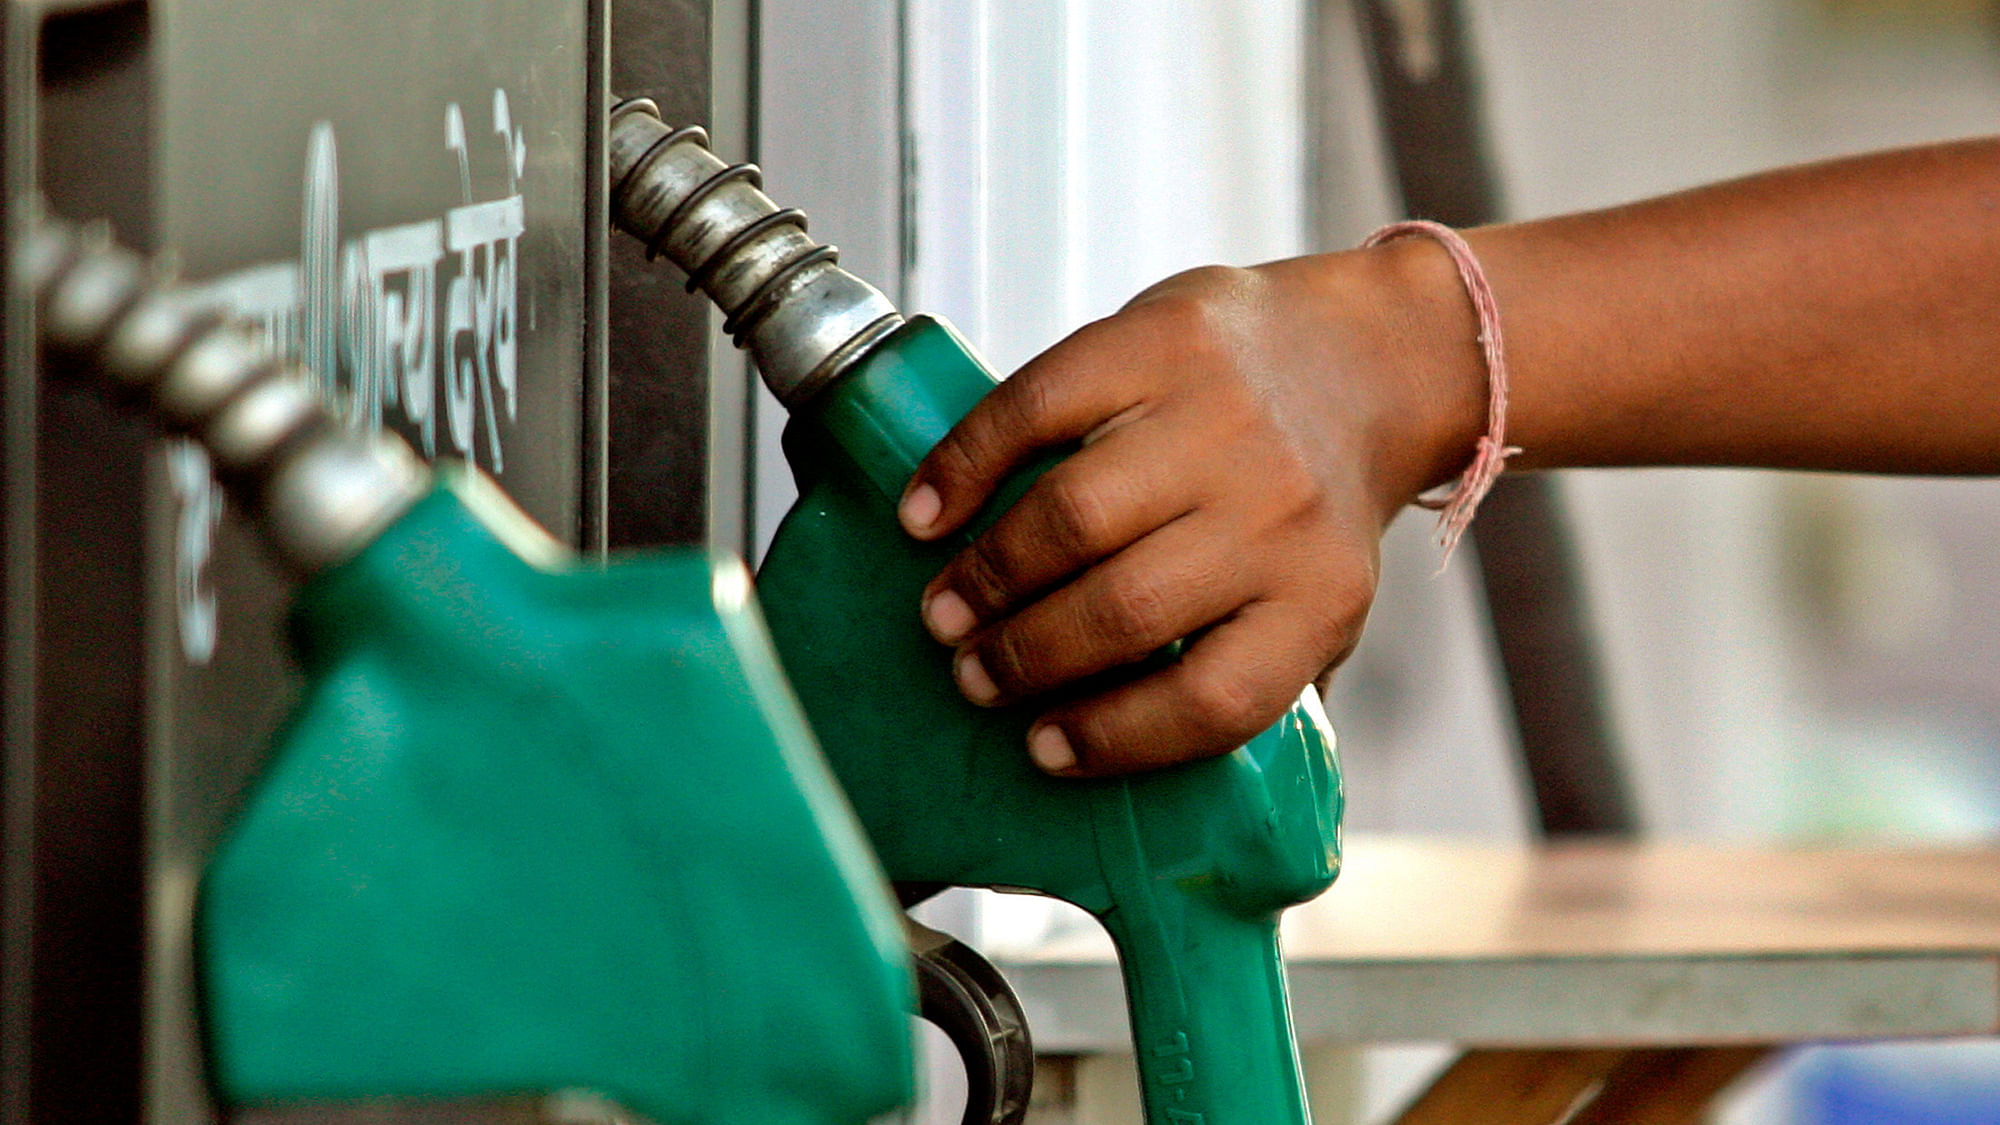 
















A worker lifts a petrol nozzle. (Photo Courtesy: Reuters)